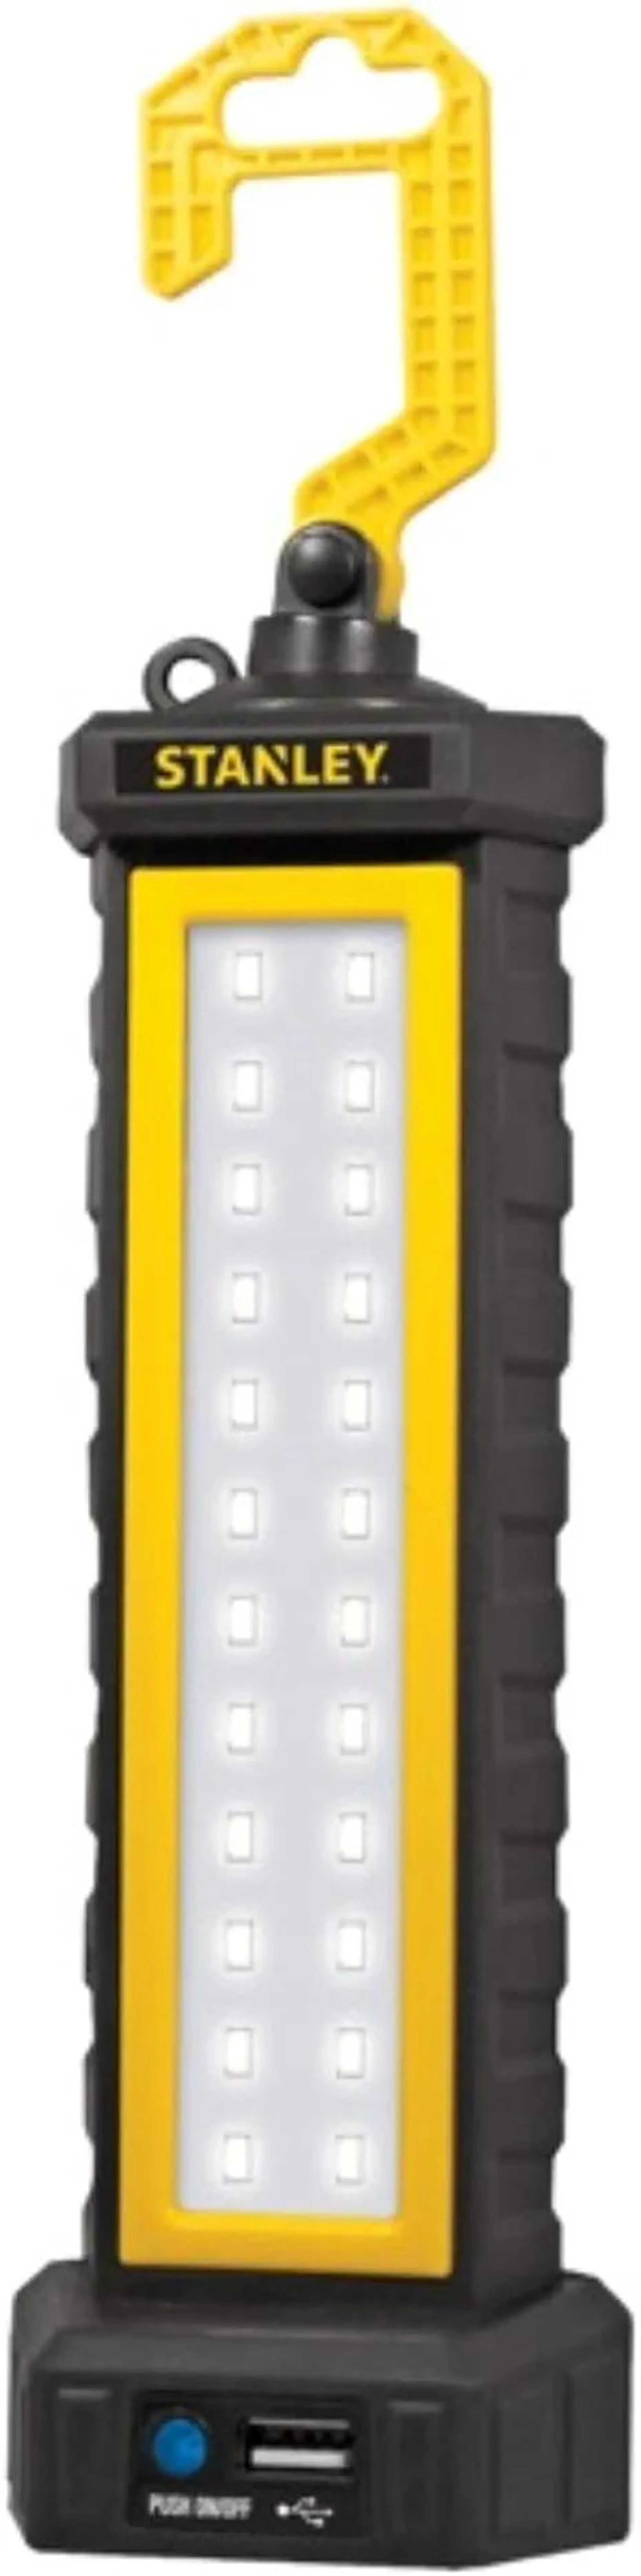 STANLEY 500-Lumen LED Bright Bar with Power in and Out